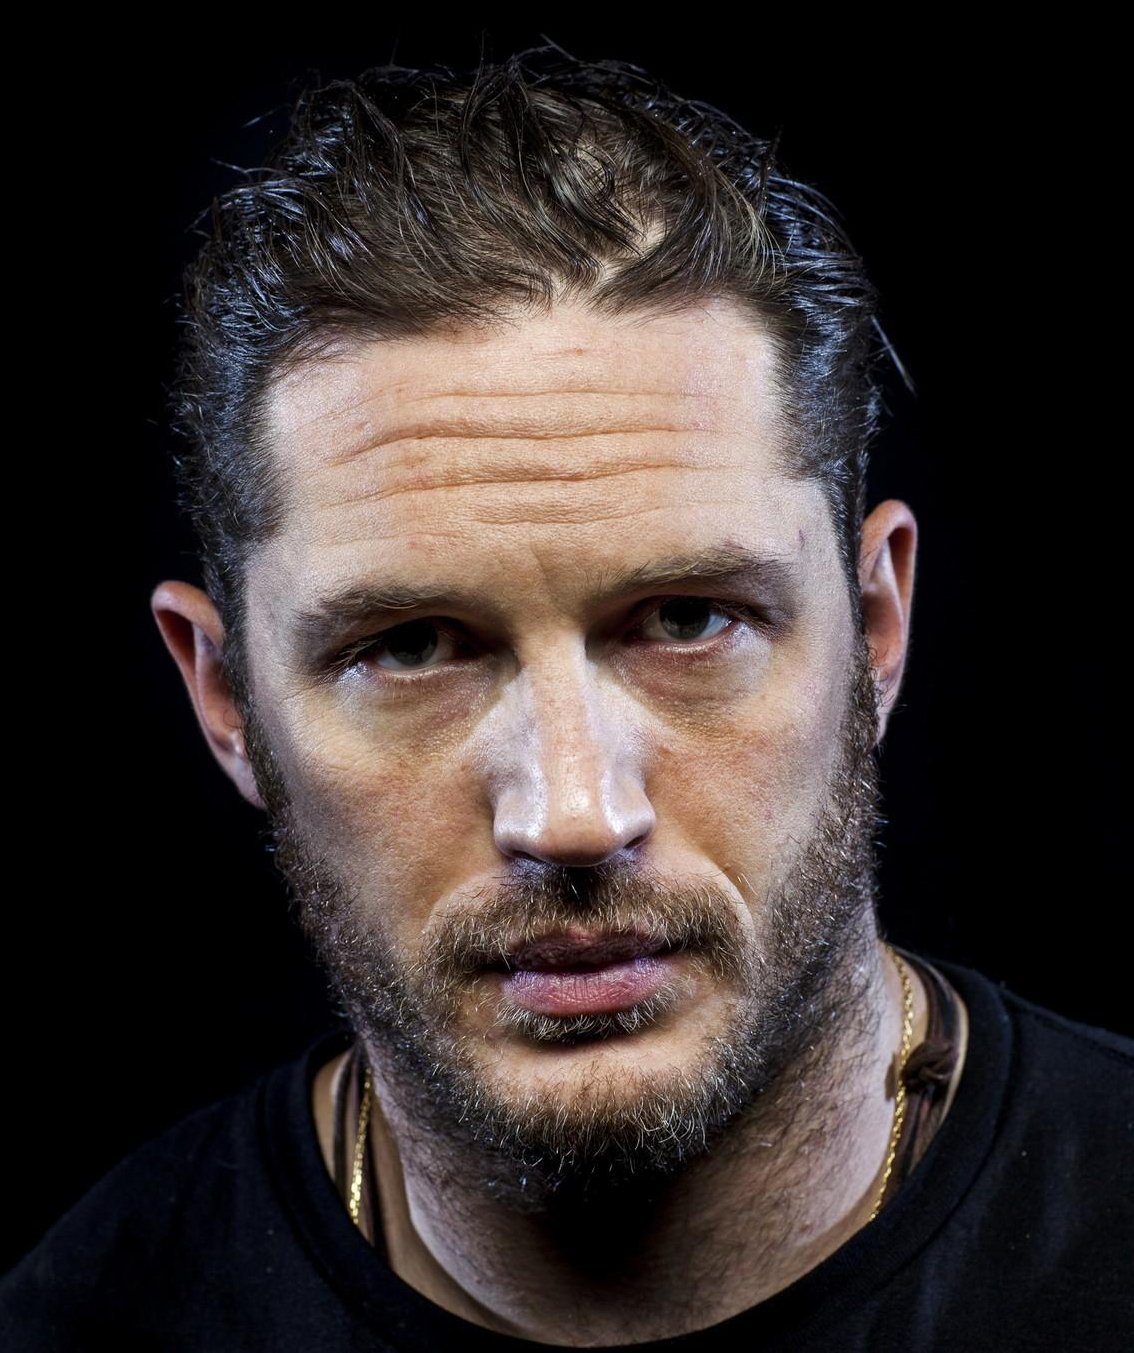 Exploring Tom Hardy A Portrait Of Tom Hardy By Jay L Clendenin From 